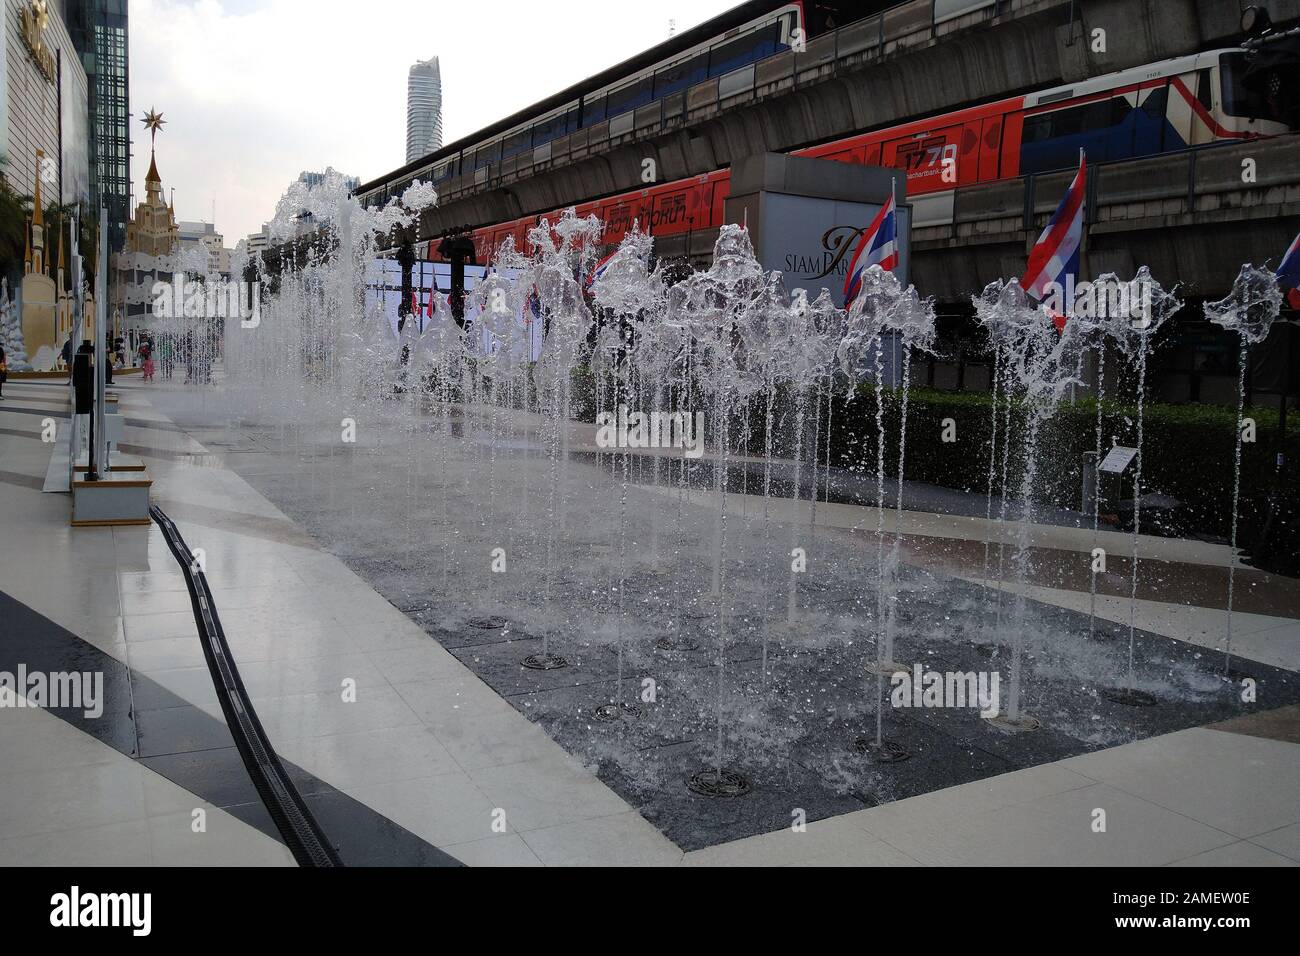 Bangkok, Thailand - December 21, 2019: Fountain between Siam Center and Siam Paragon shopping malls. BTS skytrain trains on background. Stock Photo